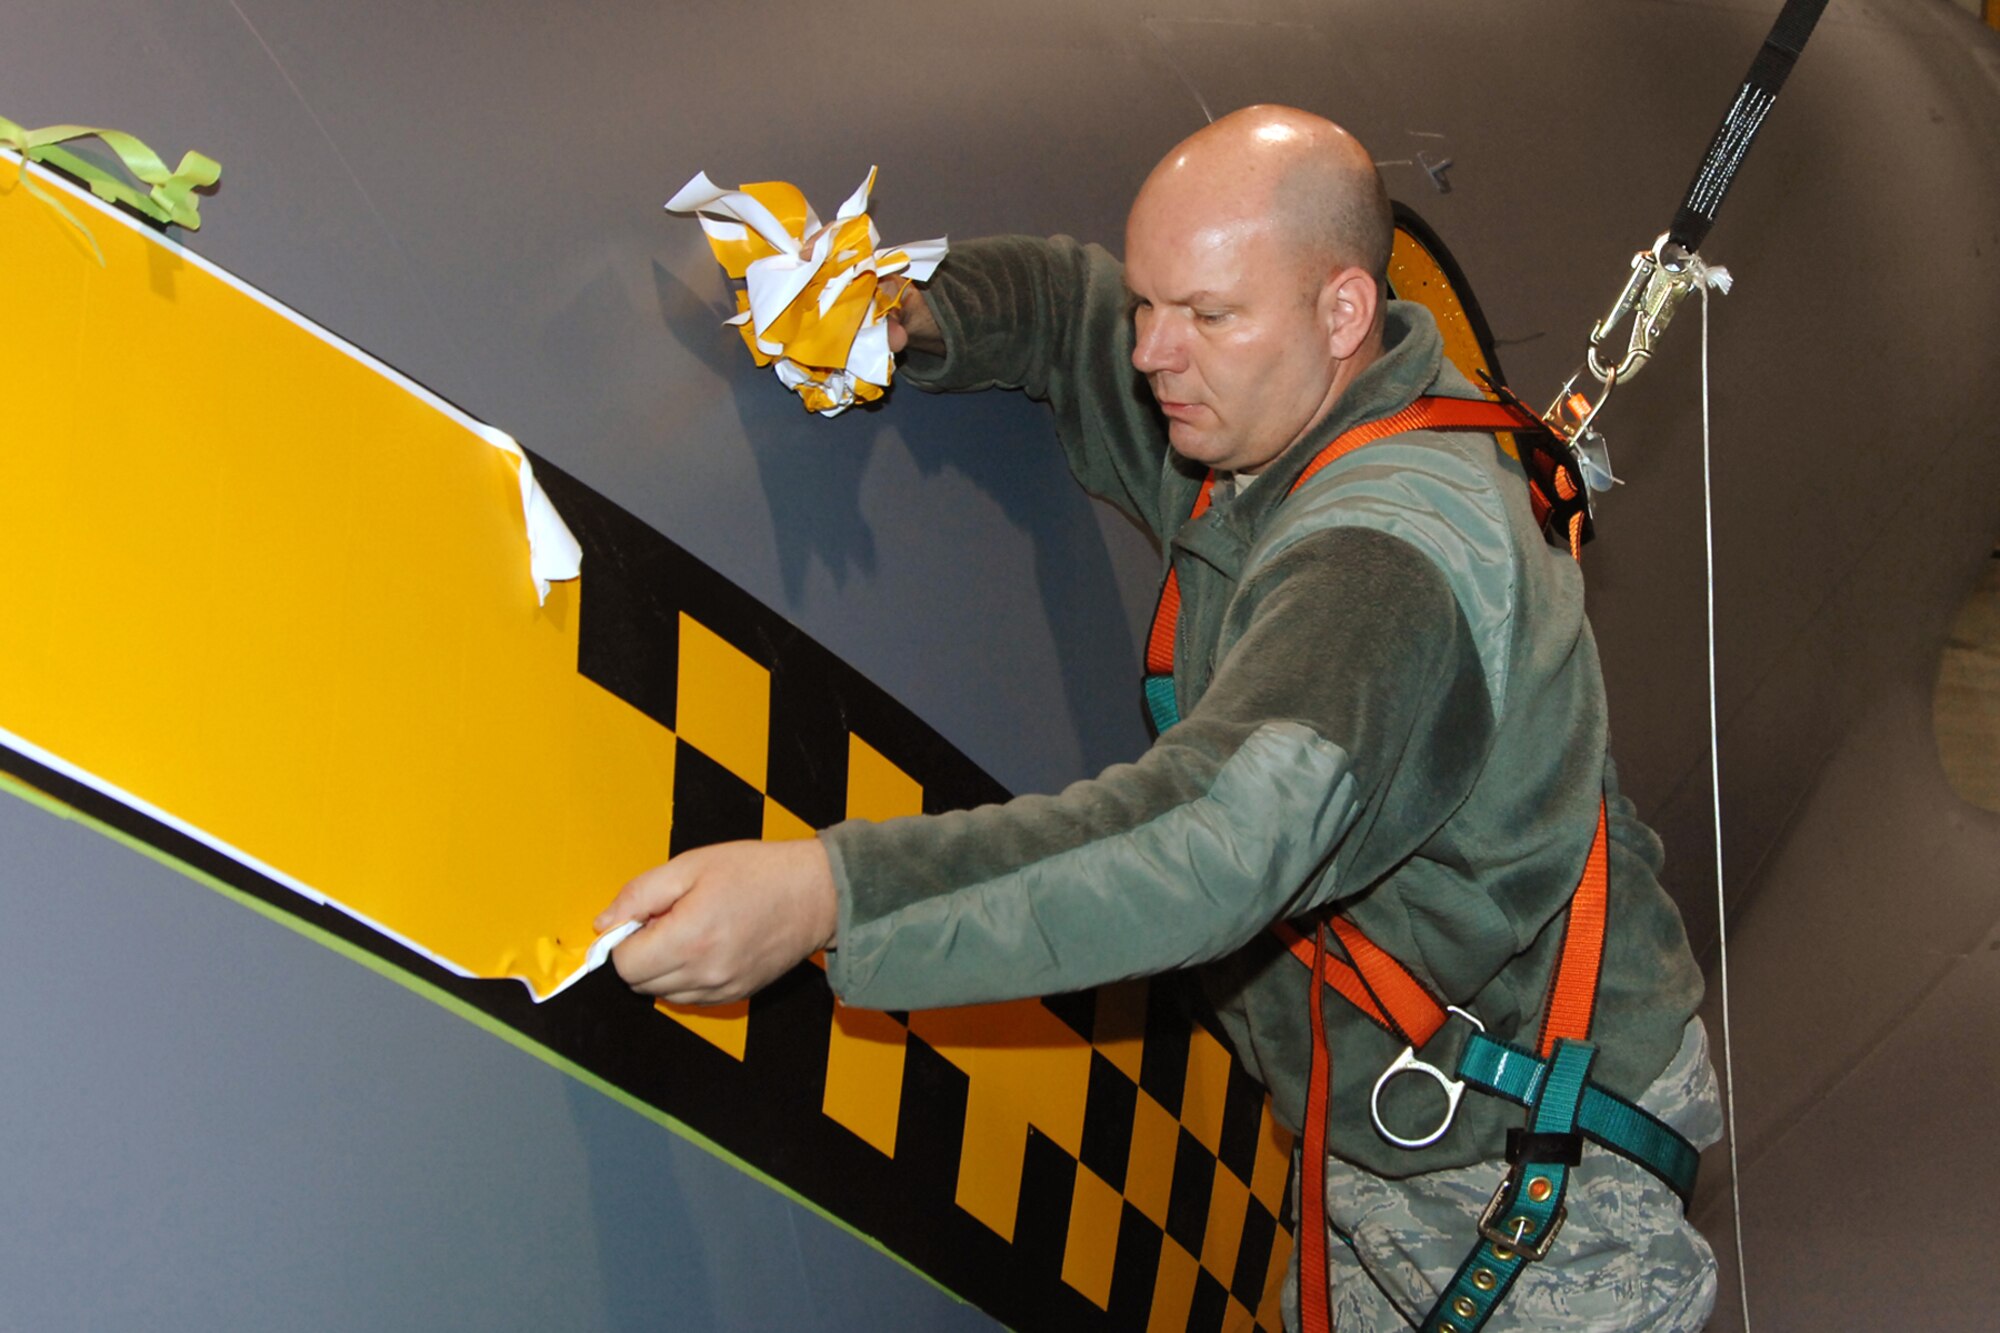 TSgt. Bart Davidson, 191st Maintenance Squadron, removes the masking tape from a checkerboard stripe newly-painted on a KC-135 Stratotanker at Selfridge Air National Guard Base, Mich., Dec. 15, 2011. The aircraft was painted with a checkerboard stripe and related detailing that honors both the heritage of the Michigan Air National Guard and the former Strategic Air Command, which once operated at Selfridge. (U.S. Air Force photo by SSgt. Rachel Barton)